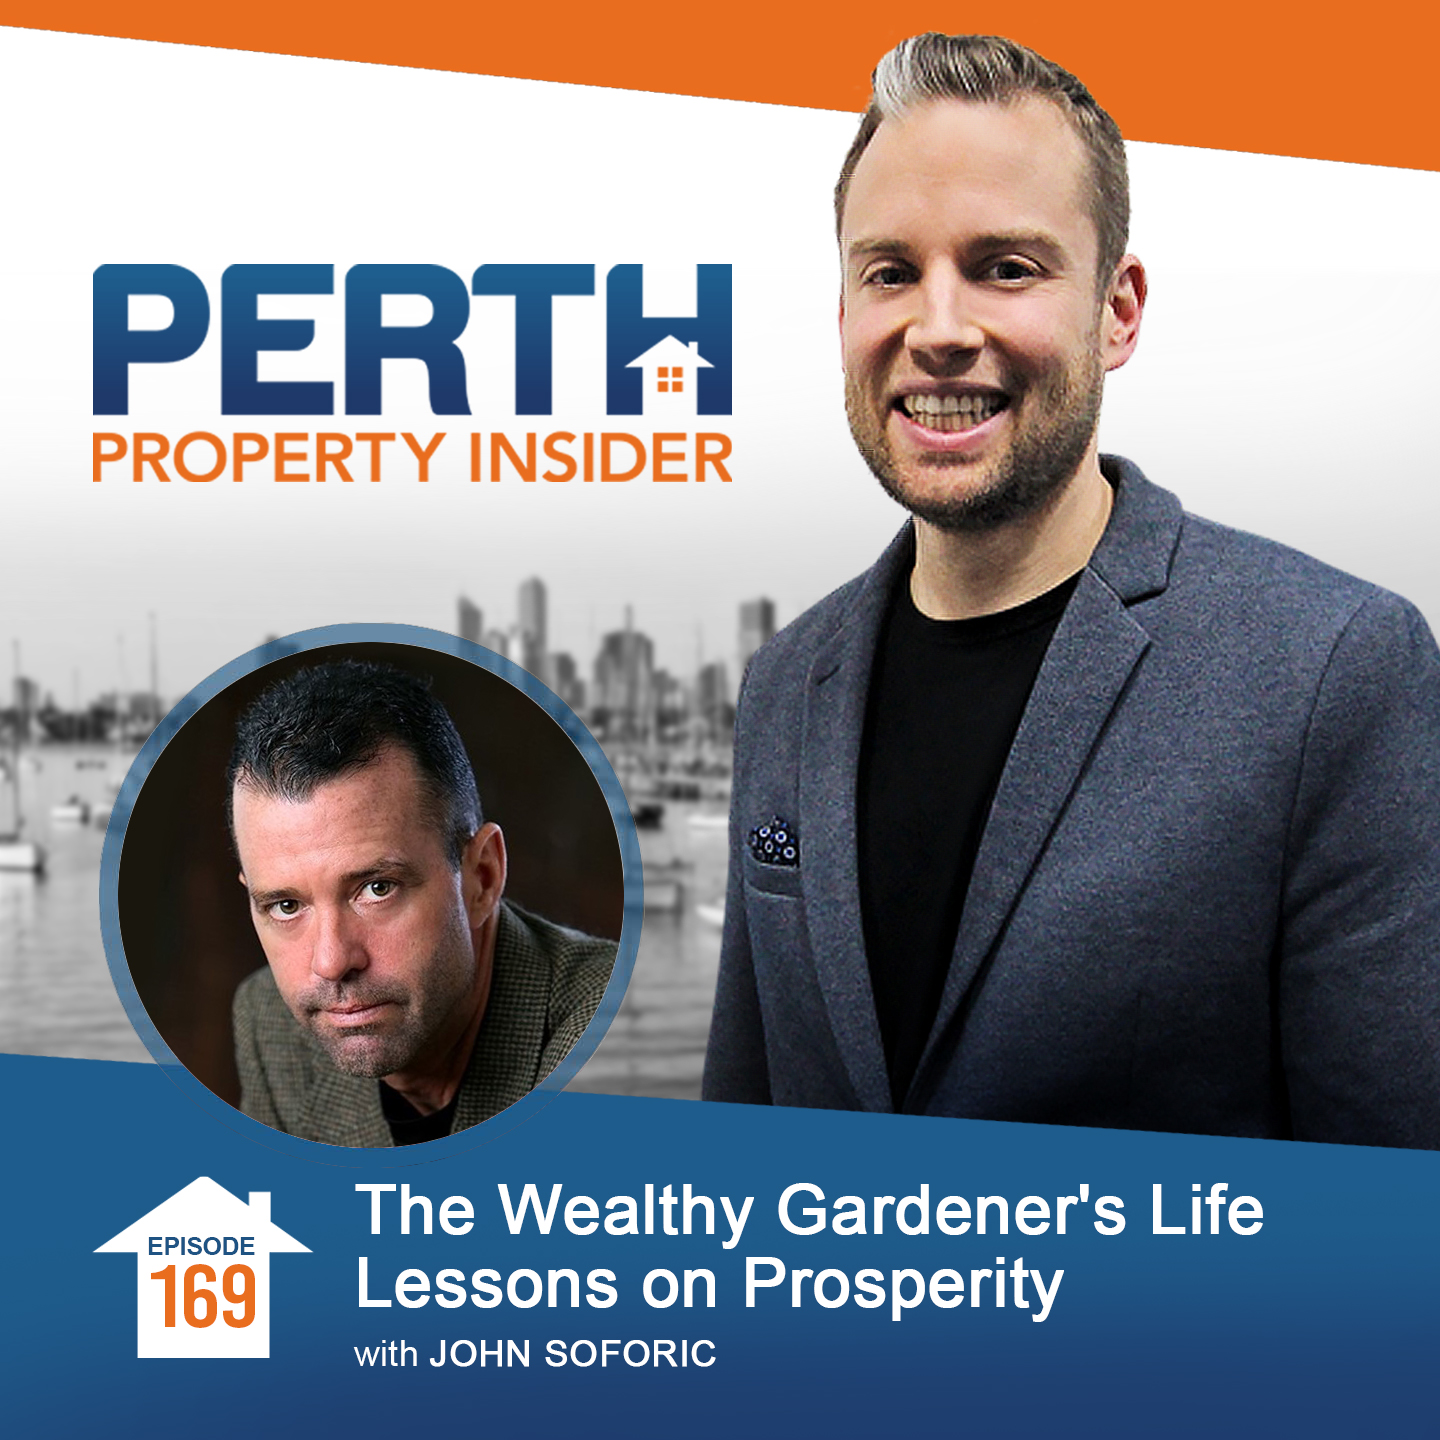 The Wealthy Gardener's Life Lessons on Prosperity with John Soforic